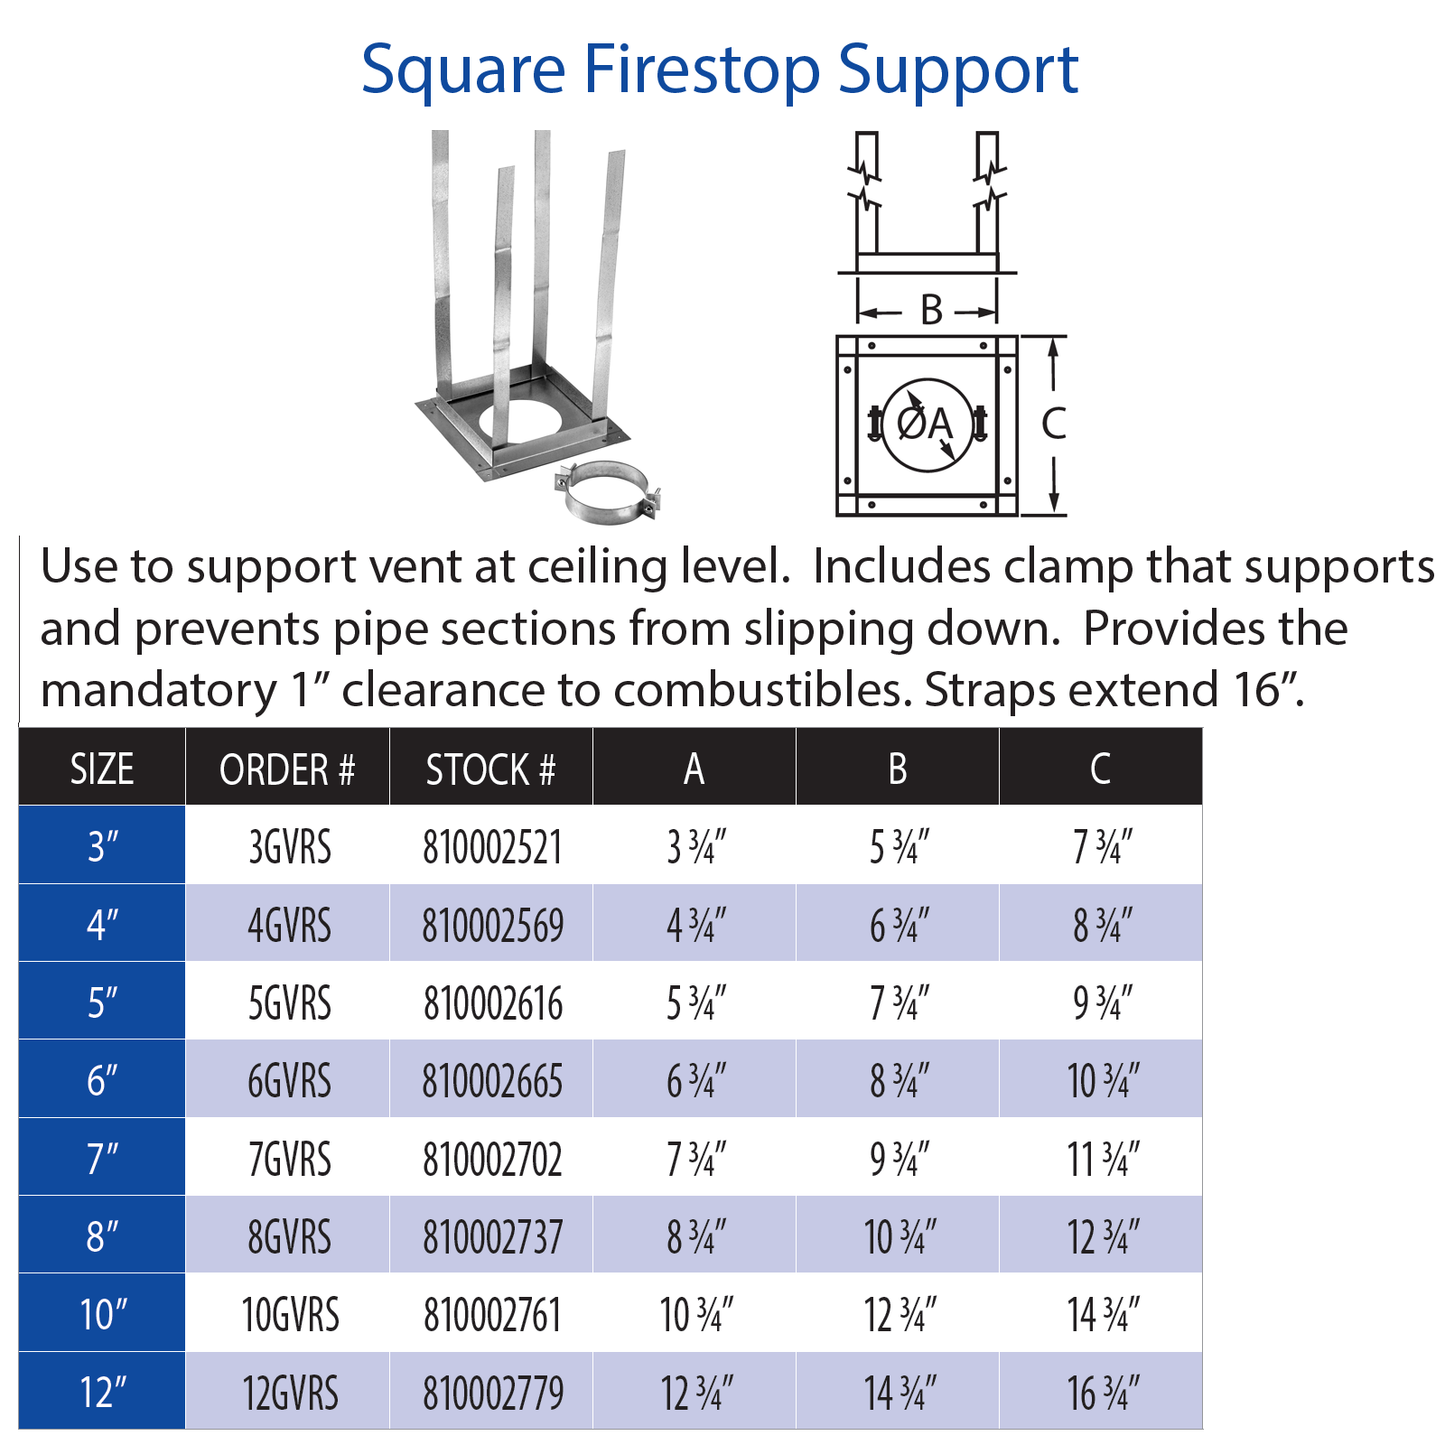 DuraVent Type B Square Firestop Support | 5GVRS